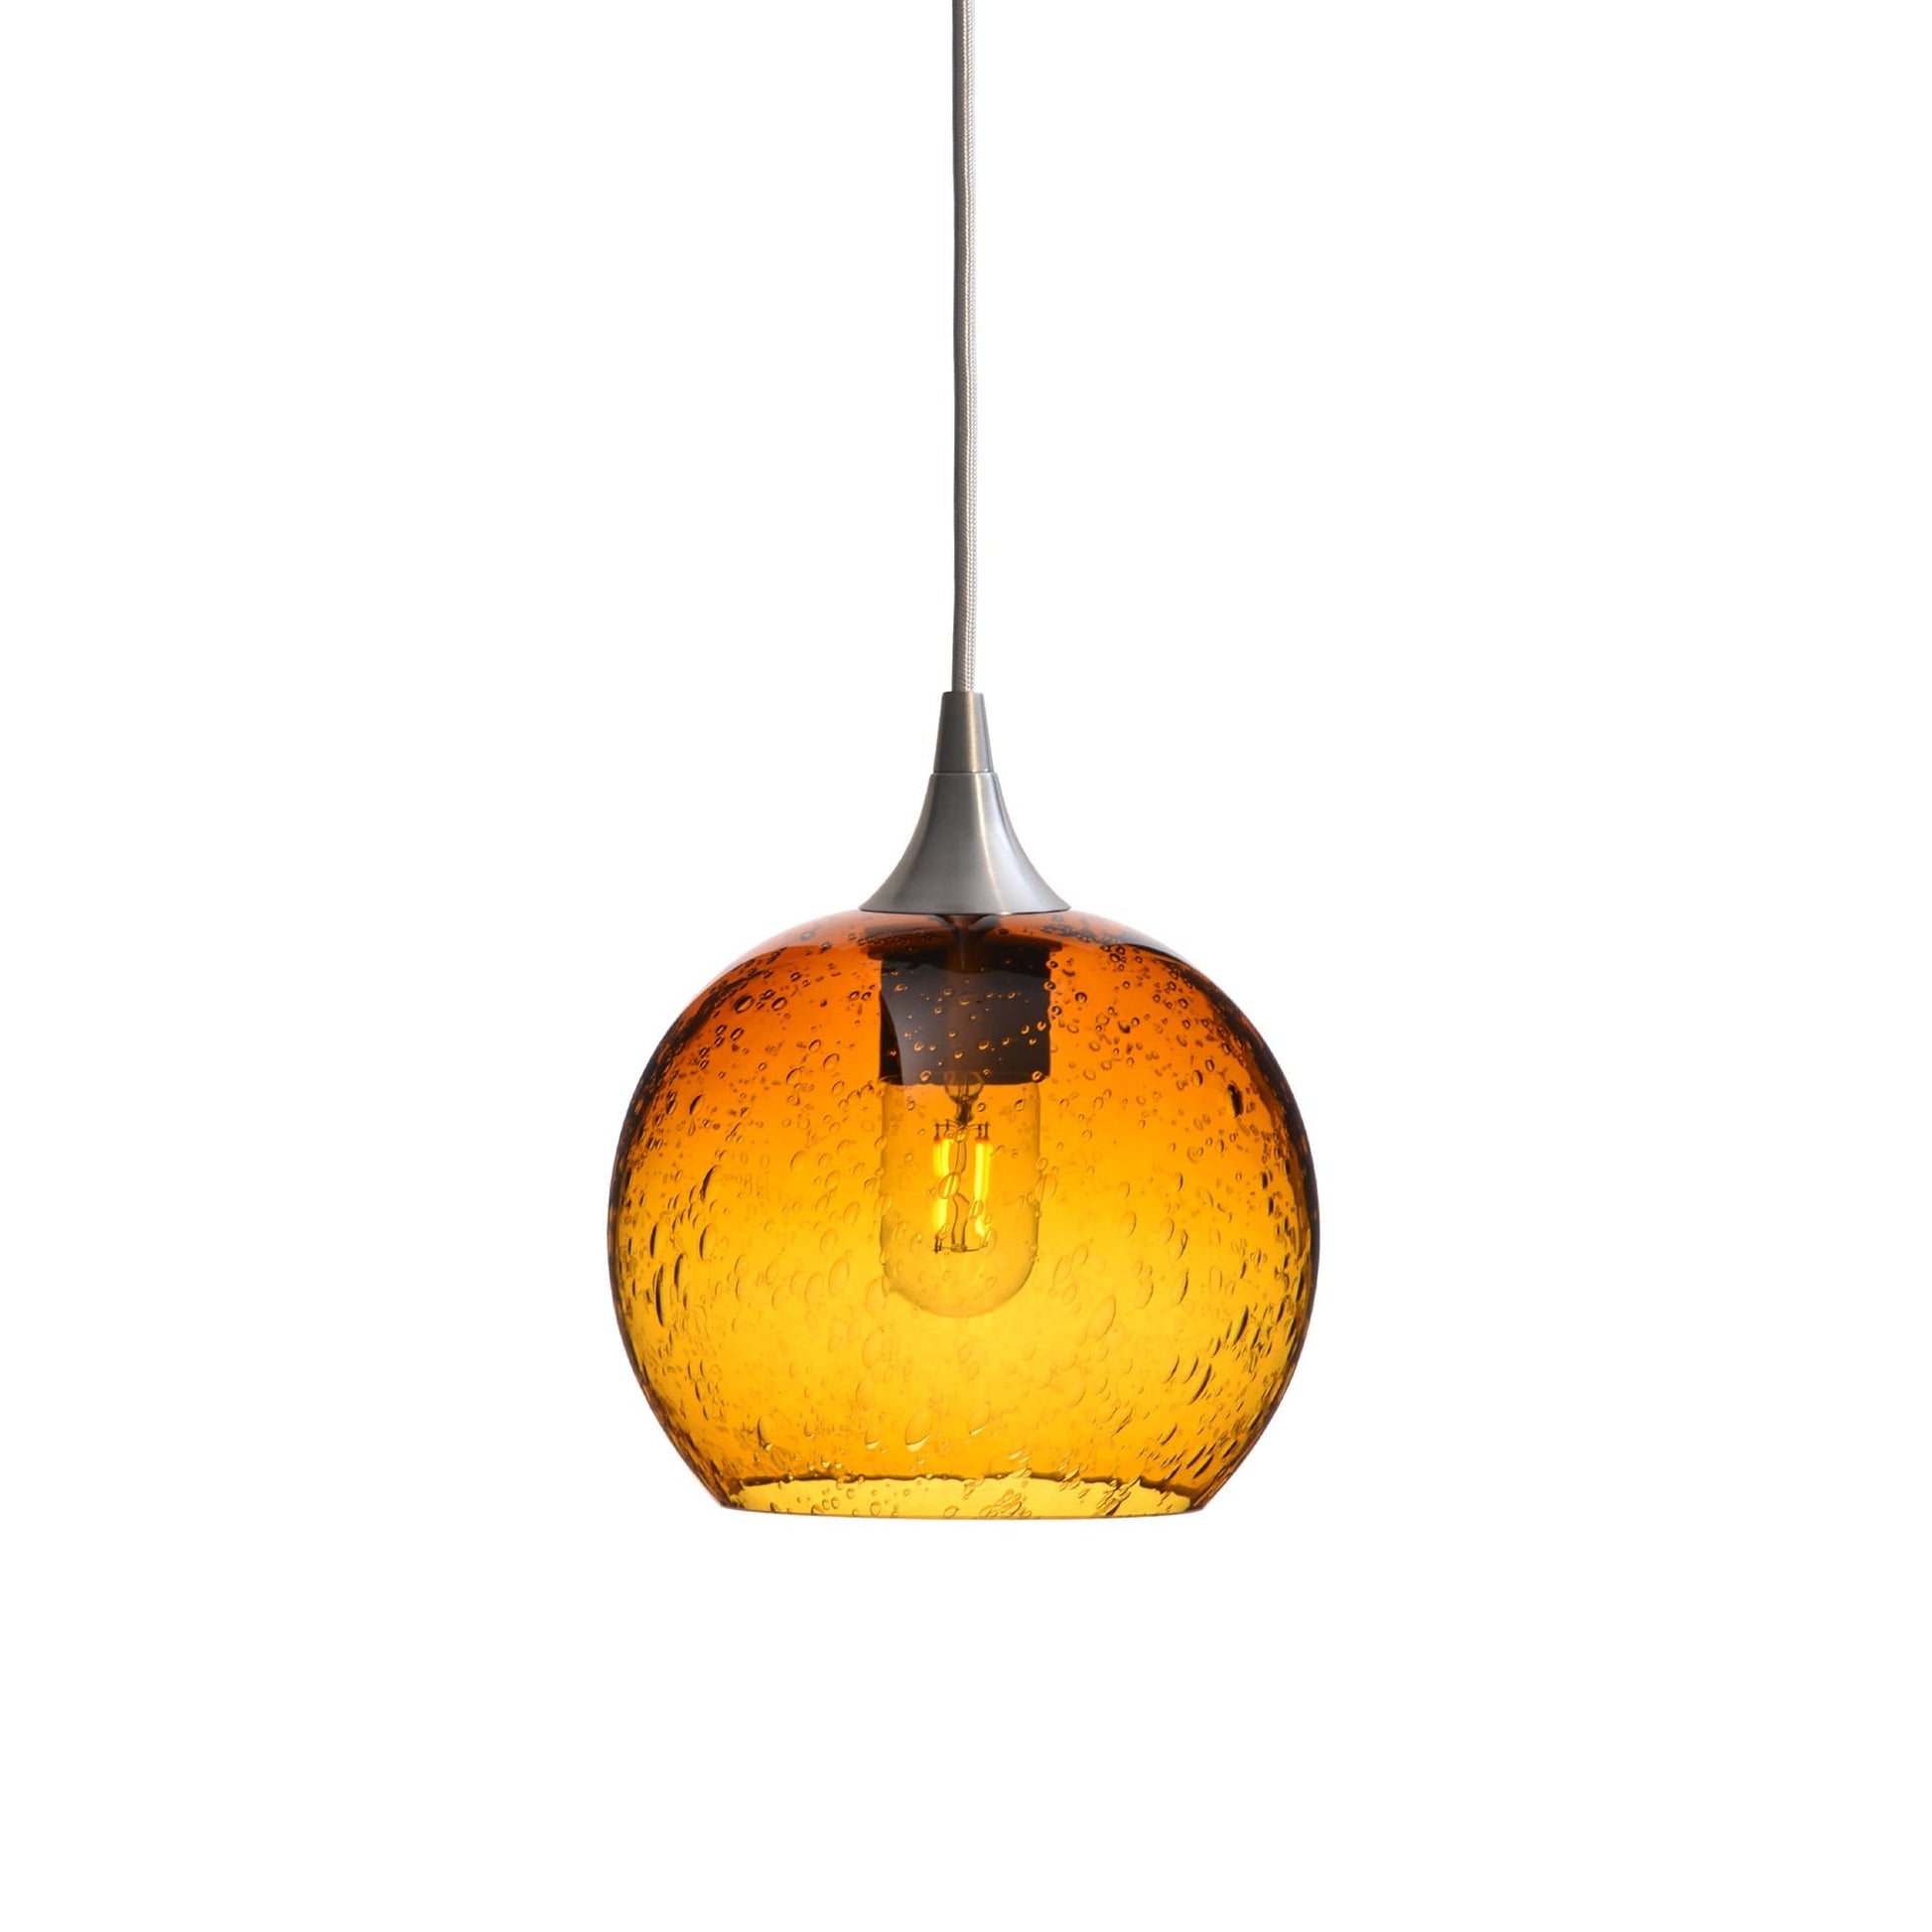 767 Lunar: Single Pendant Light-Glass-Bicycle Glass Co - Hotshop-Harvest Gold-Brushed Nickel-Bicycle Glass Co